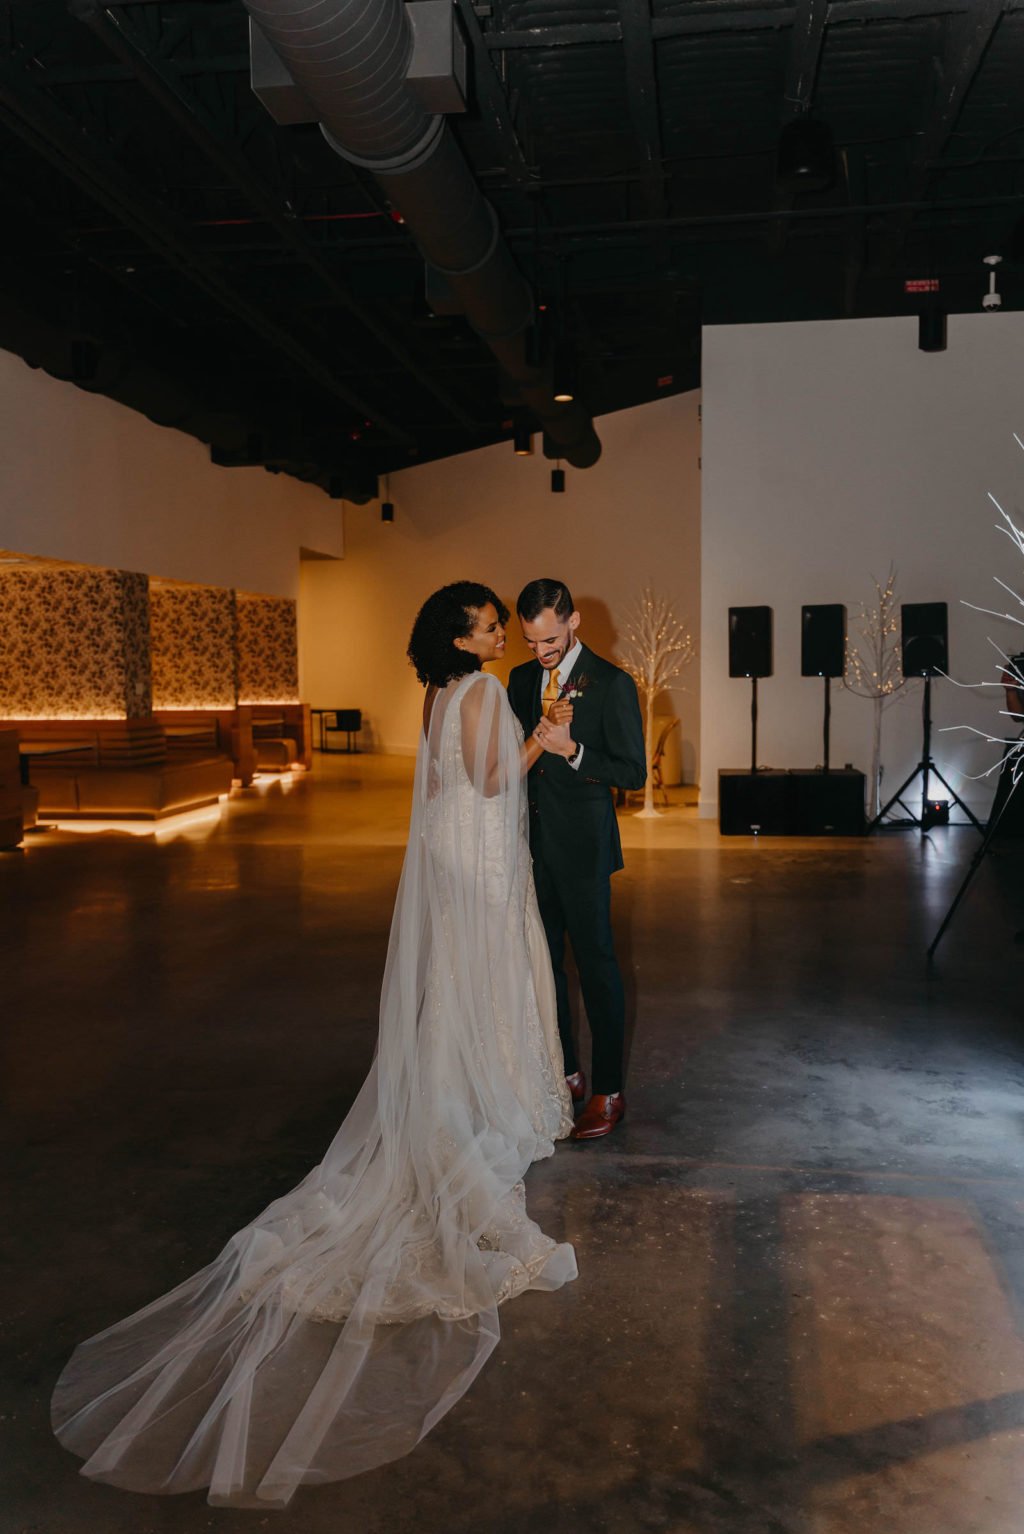 Indoor Bride and Groom First Dance in Tampa Wedding Venue Hyde House | Illusion Lace Embroidered Beaded V Neck Wedding Dress Bridal Gown with Sheer Tulle Cape Sleeves by Designer Amalia Carrara Bridal | Groom in Classic Black Tux Suit with Gold Tie